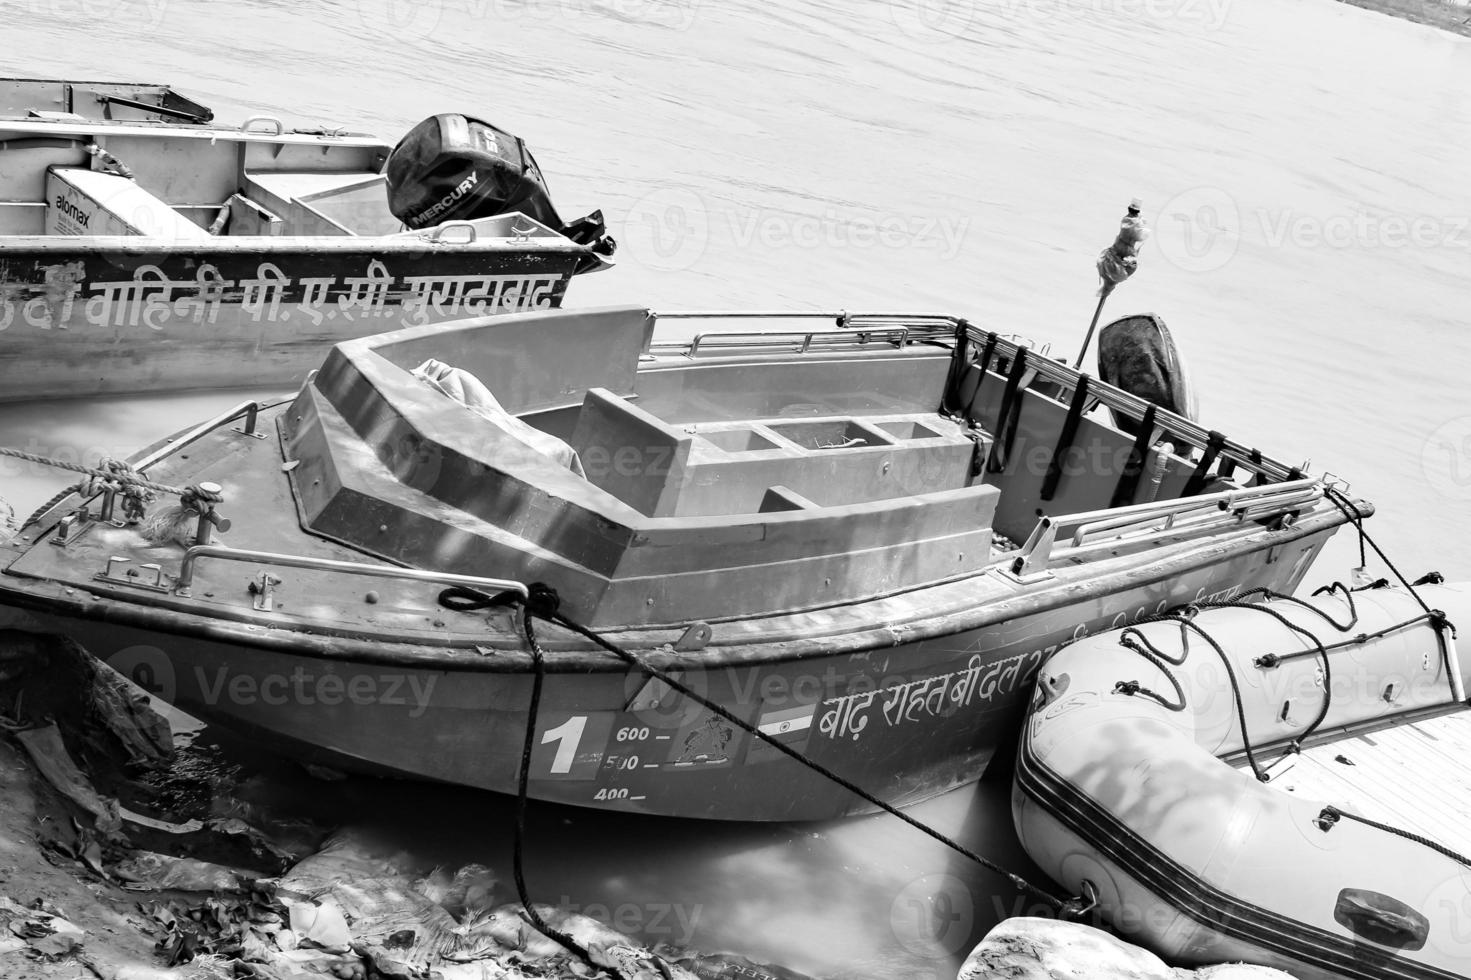 Ganga as seen in Garh Mukteshwar, Uttar Pradesh, India, Ganga is believed to be the holiest river for Hindu, View of Garh Ganga Brij ghat which is famous religious place for Hindu - Black and White photo